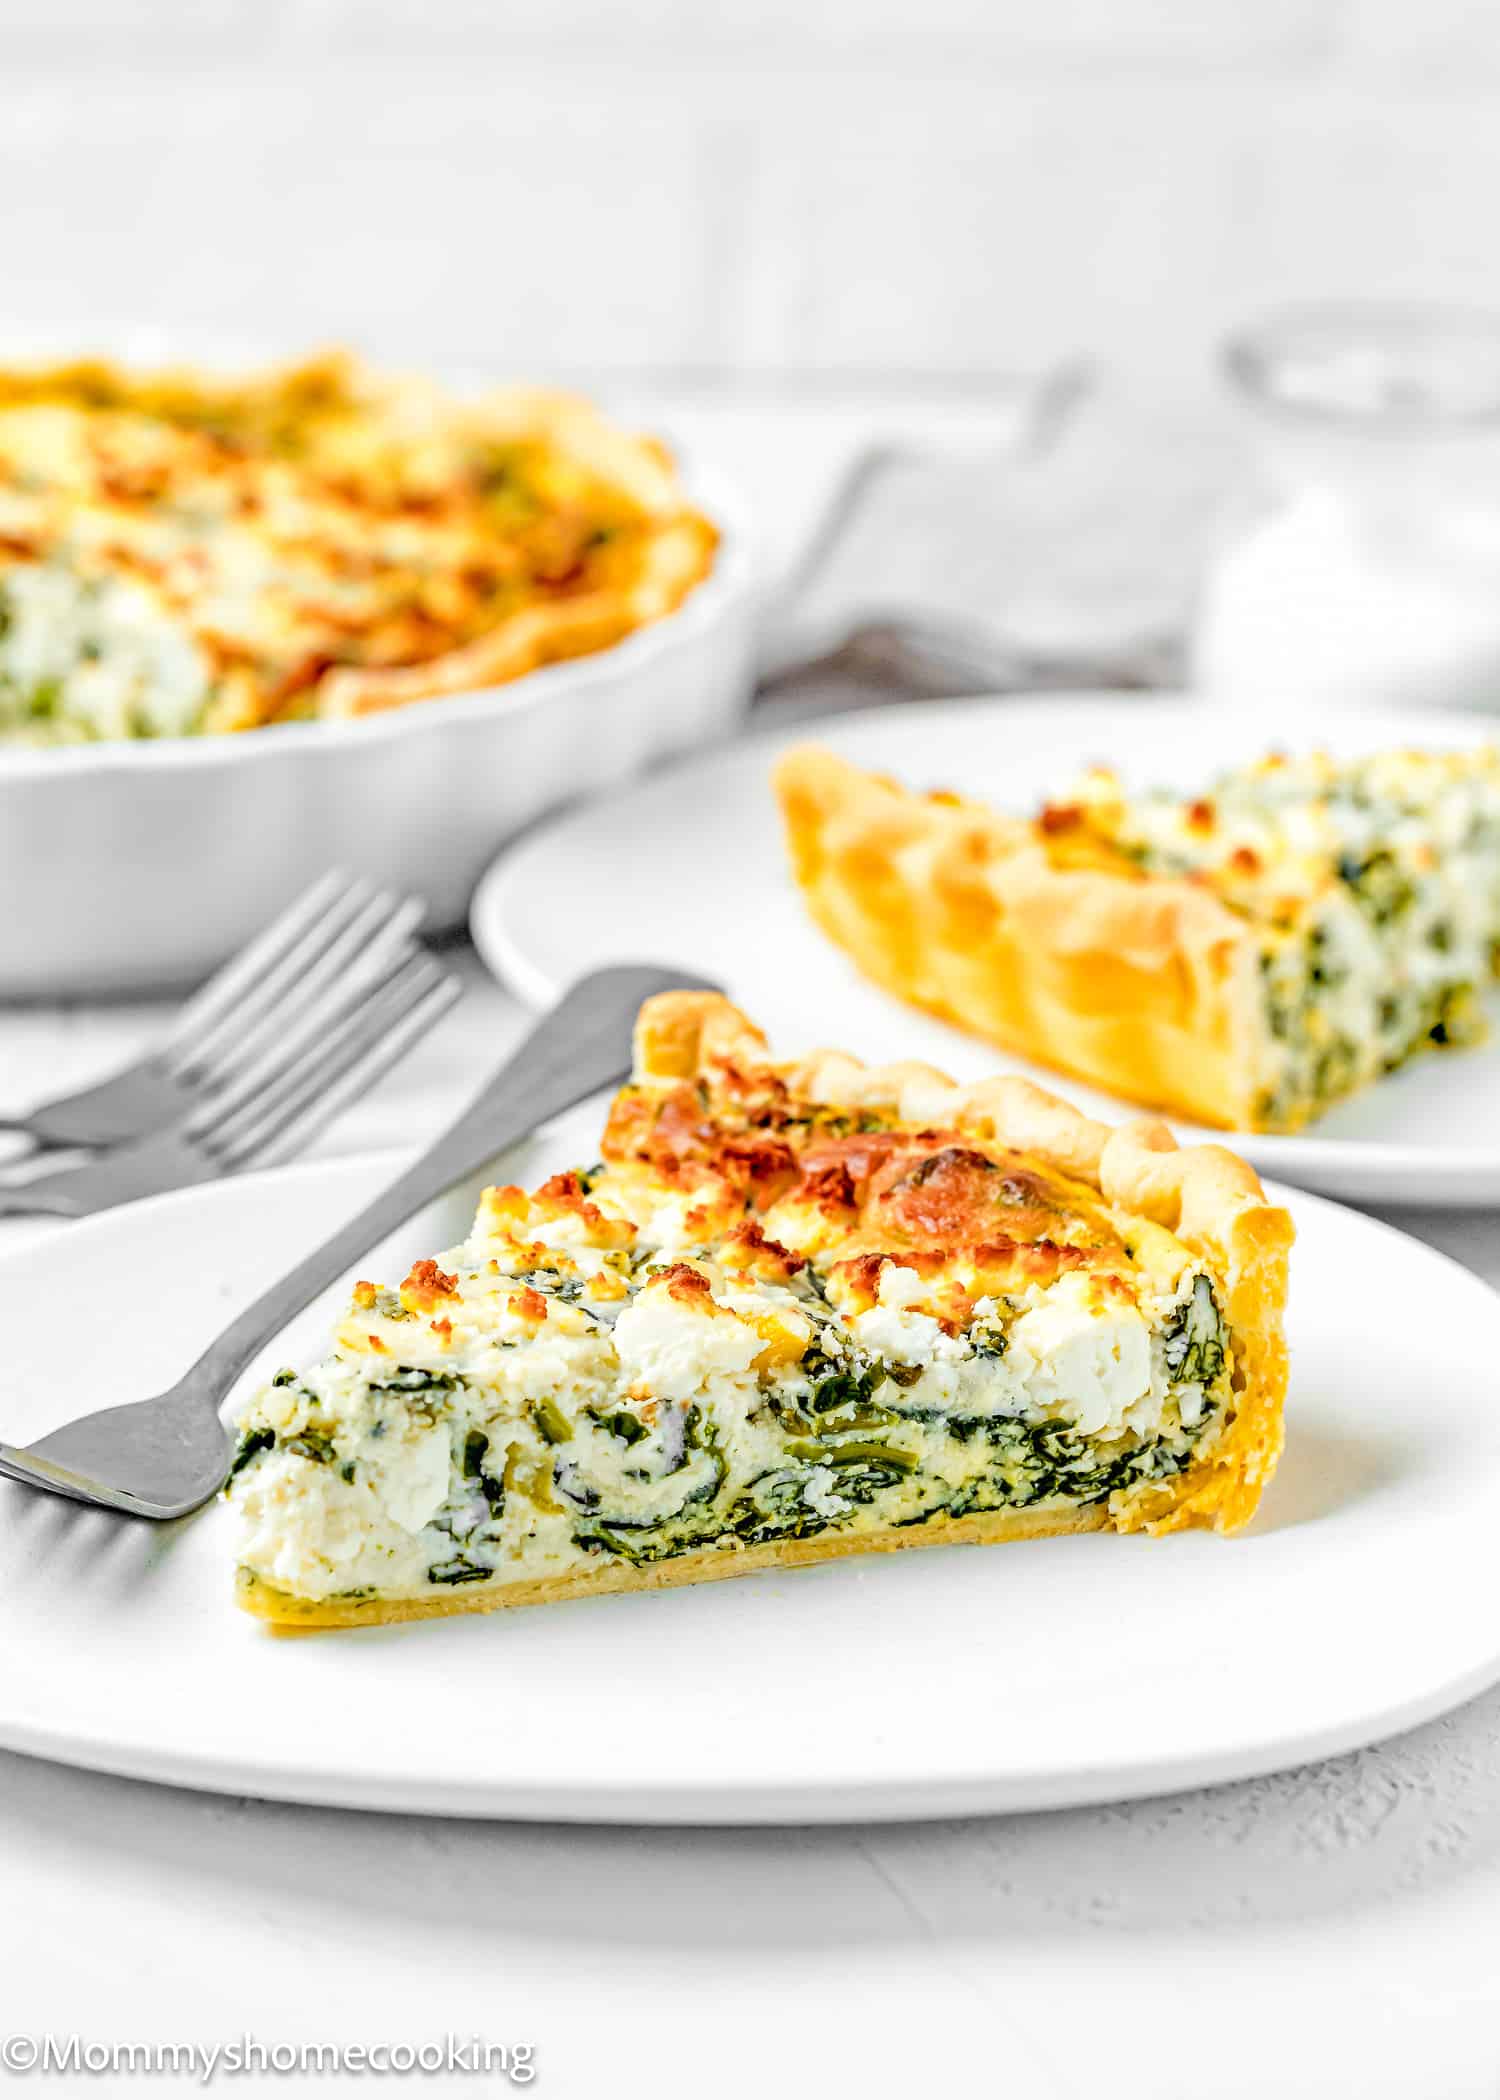 a slice of eggless quiche over a white plate with plates and forks on the sides.